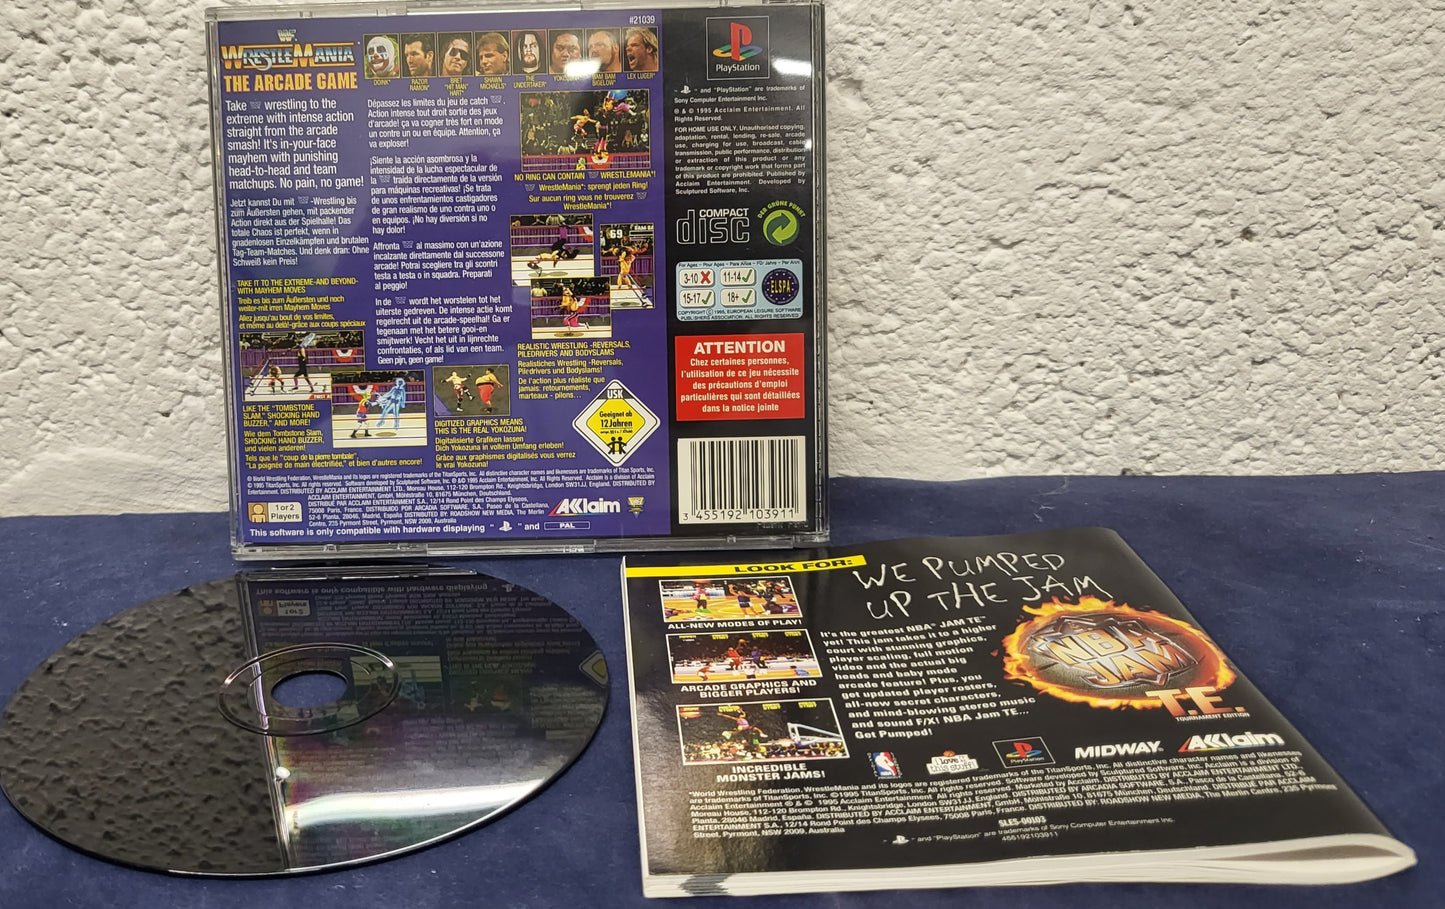 WWF Wrestlemania the Arcade Game Sony Playstation 1 (PS1) RARE Game